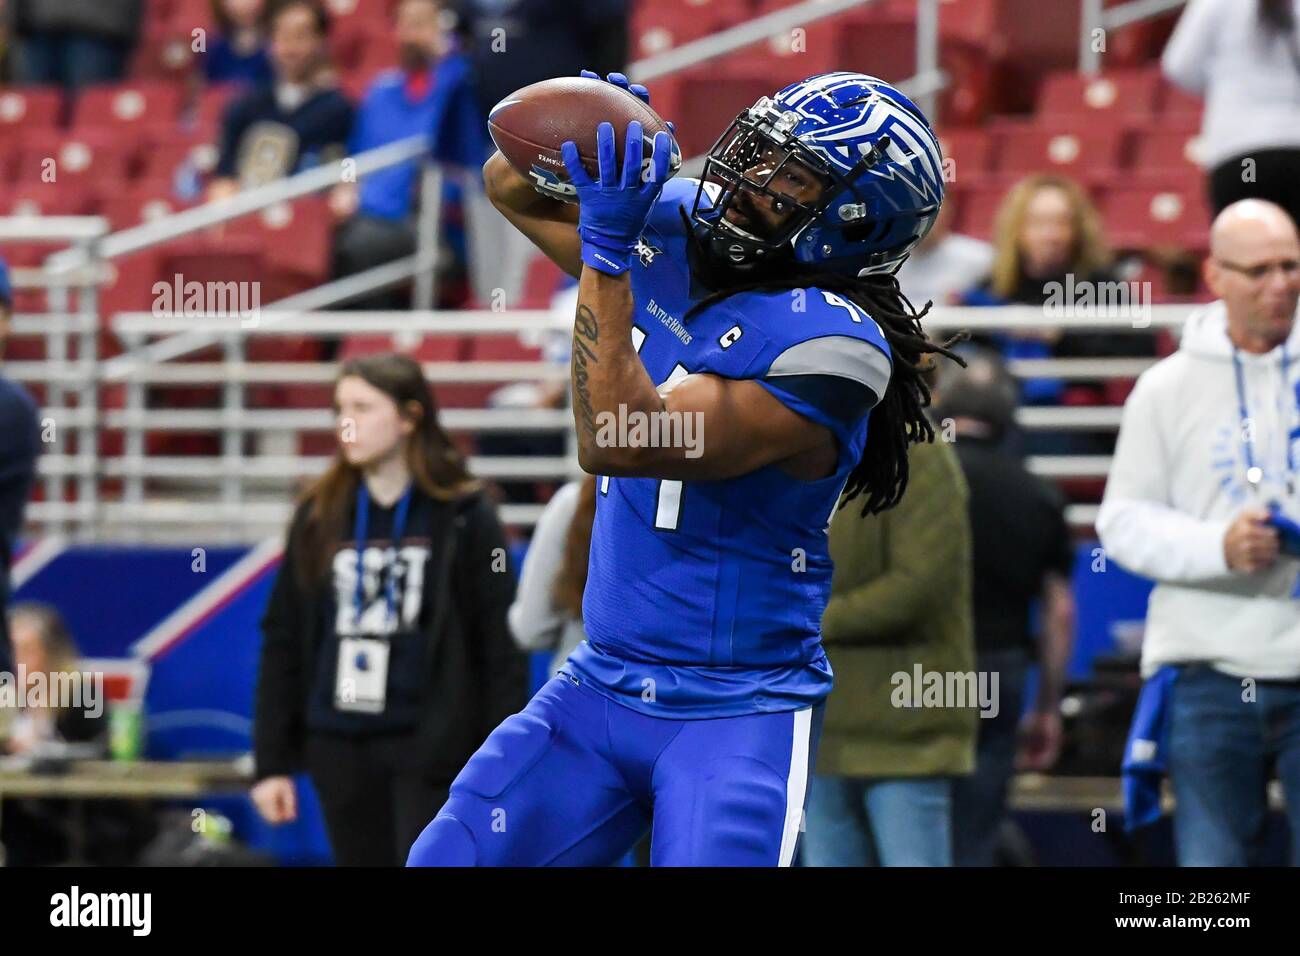 St. Louis. 29th Feb, 2020. St. Louis Battlehawks safety Joe Powell (44) catches the ball in warmups between the St. Louis Battlehawks and the Seattle Dragon an XFL football game, Saturday, Feb. 29, 2020, in St. Louis, Mo. The Battlehawks defeated the Dragons 23-16. Credit: European Sports Photographic Agency/Alamy Live News Stock Photo